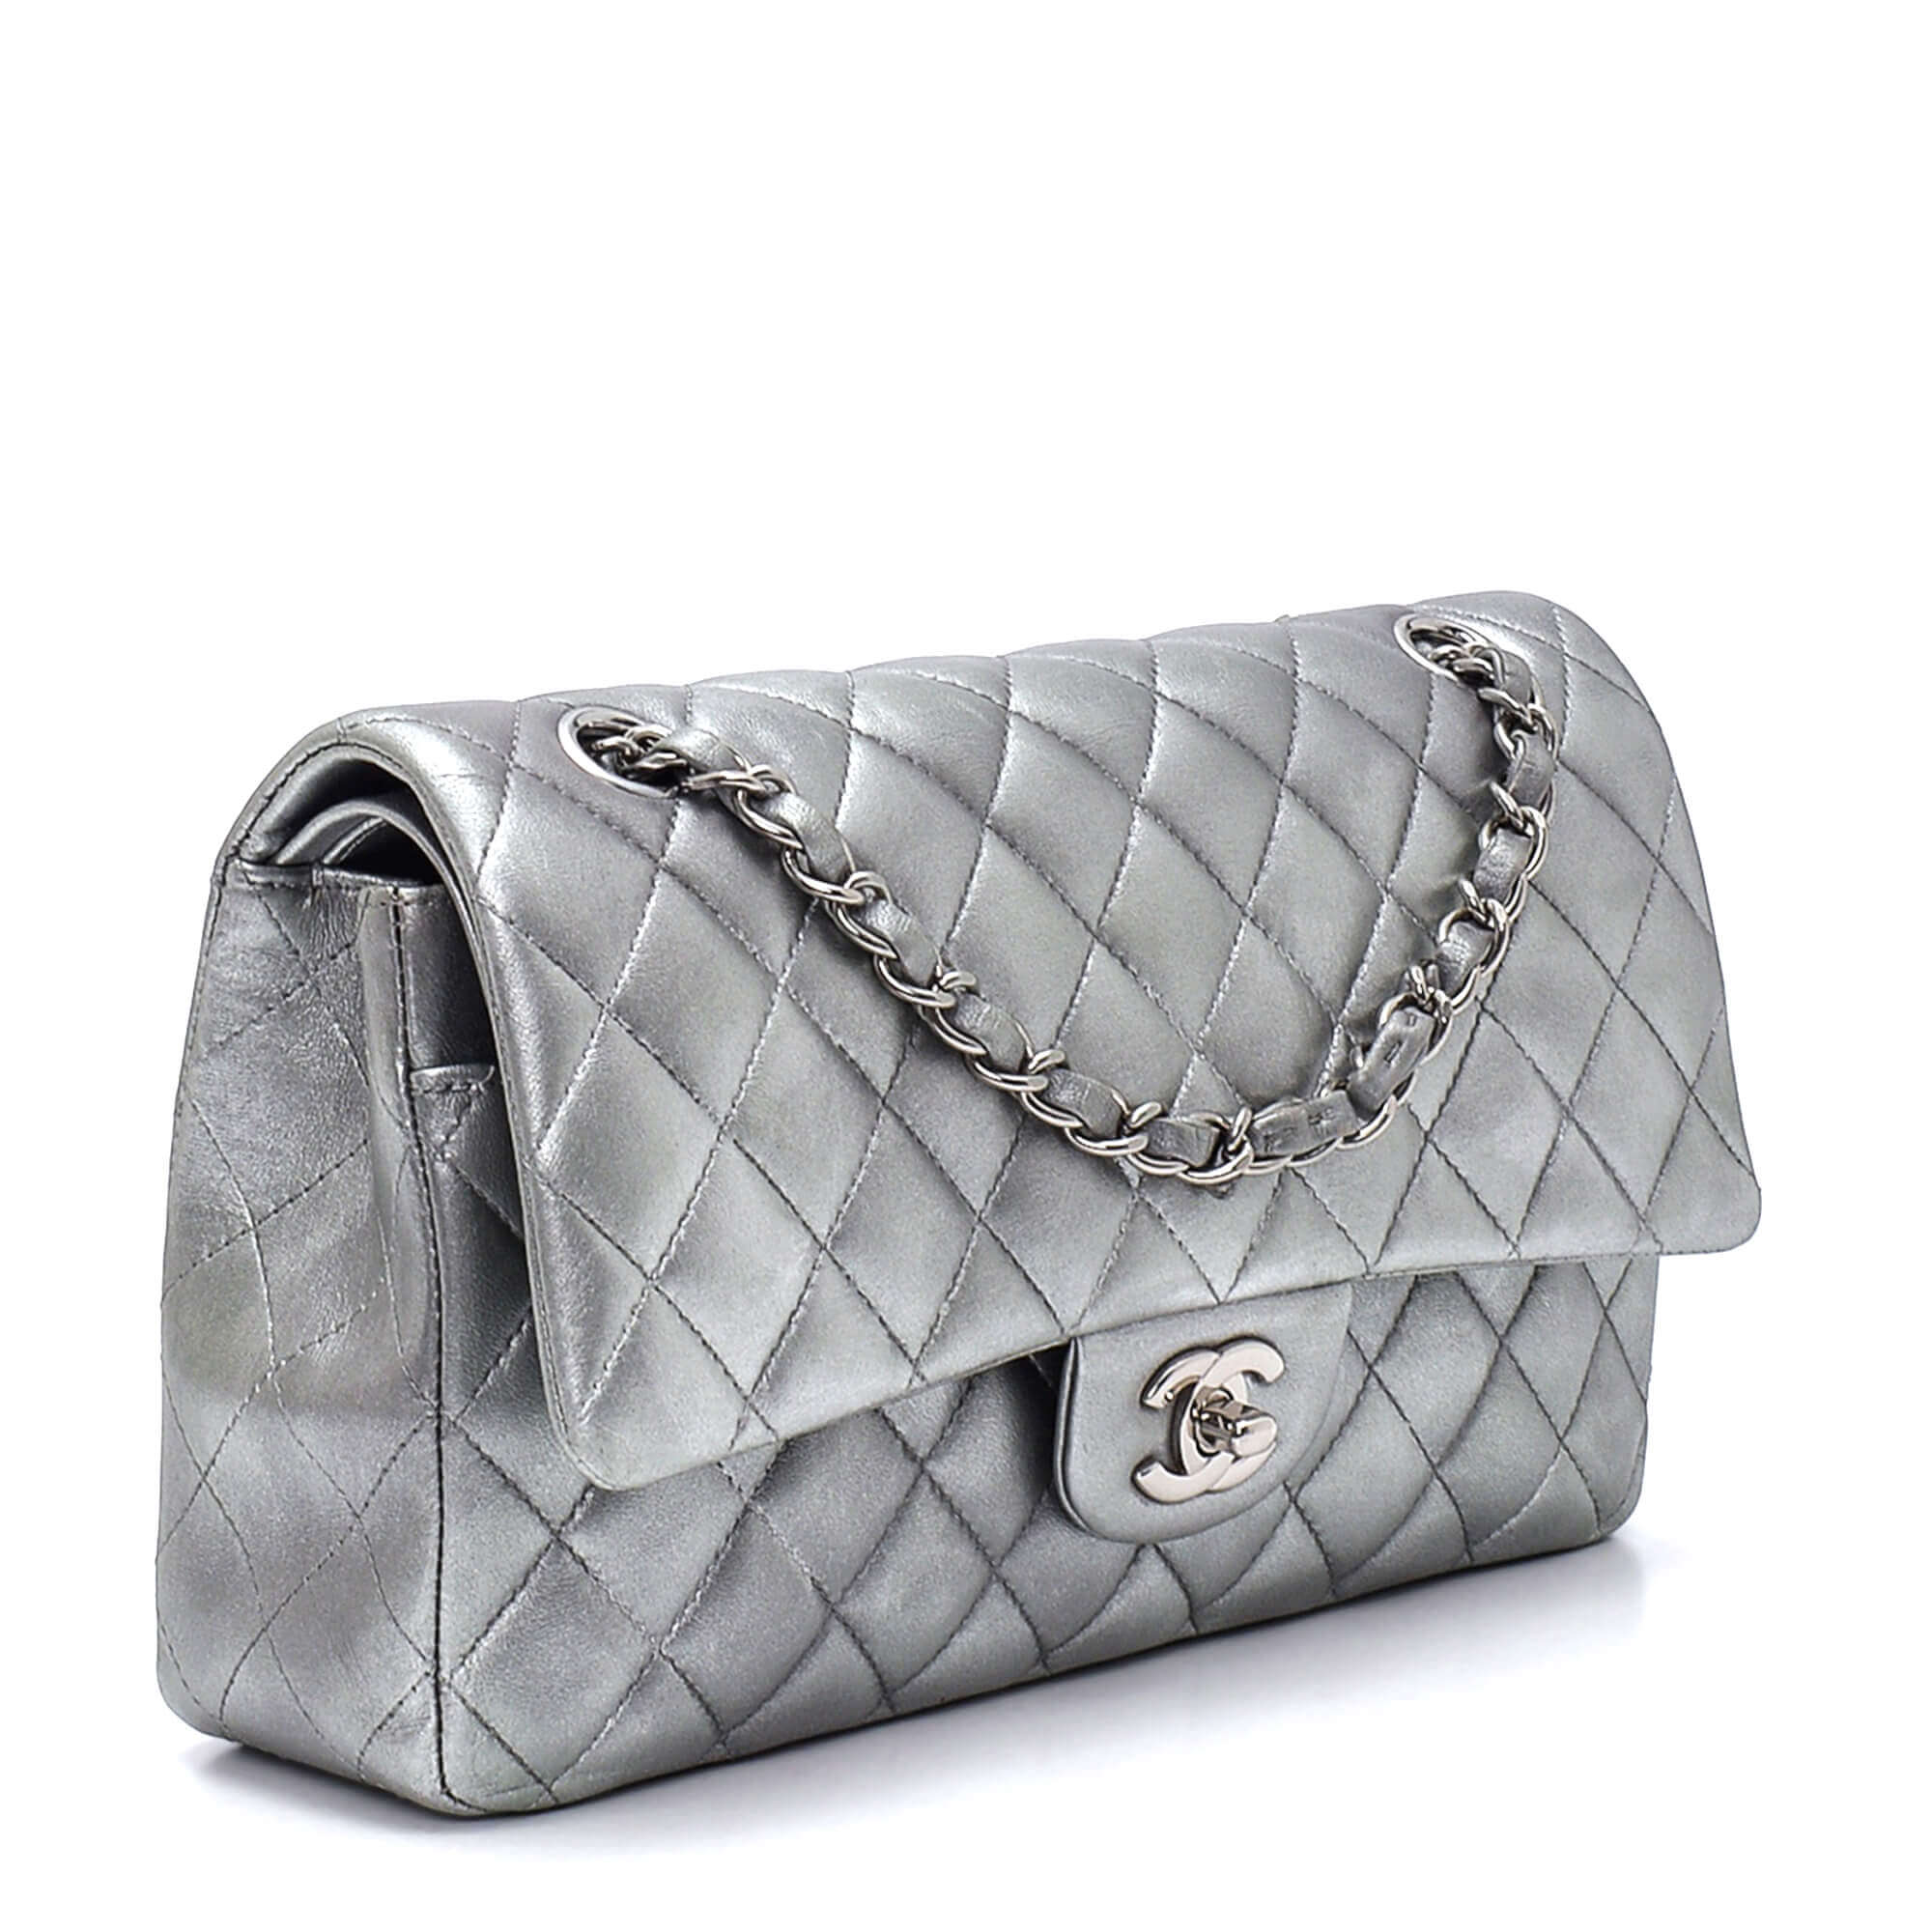 Chanel - Metallic Grey Quilted Lambskin Leather 2.55 Flap Bag